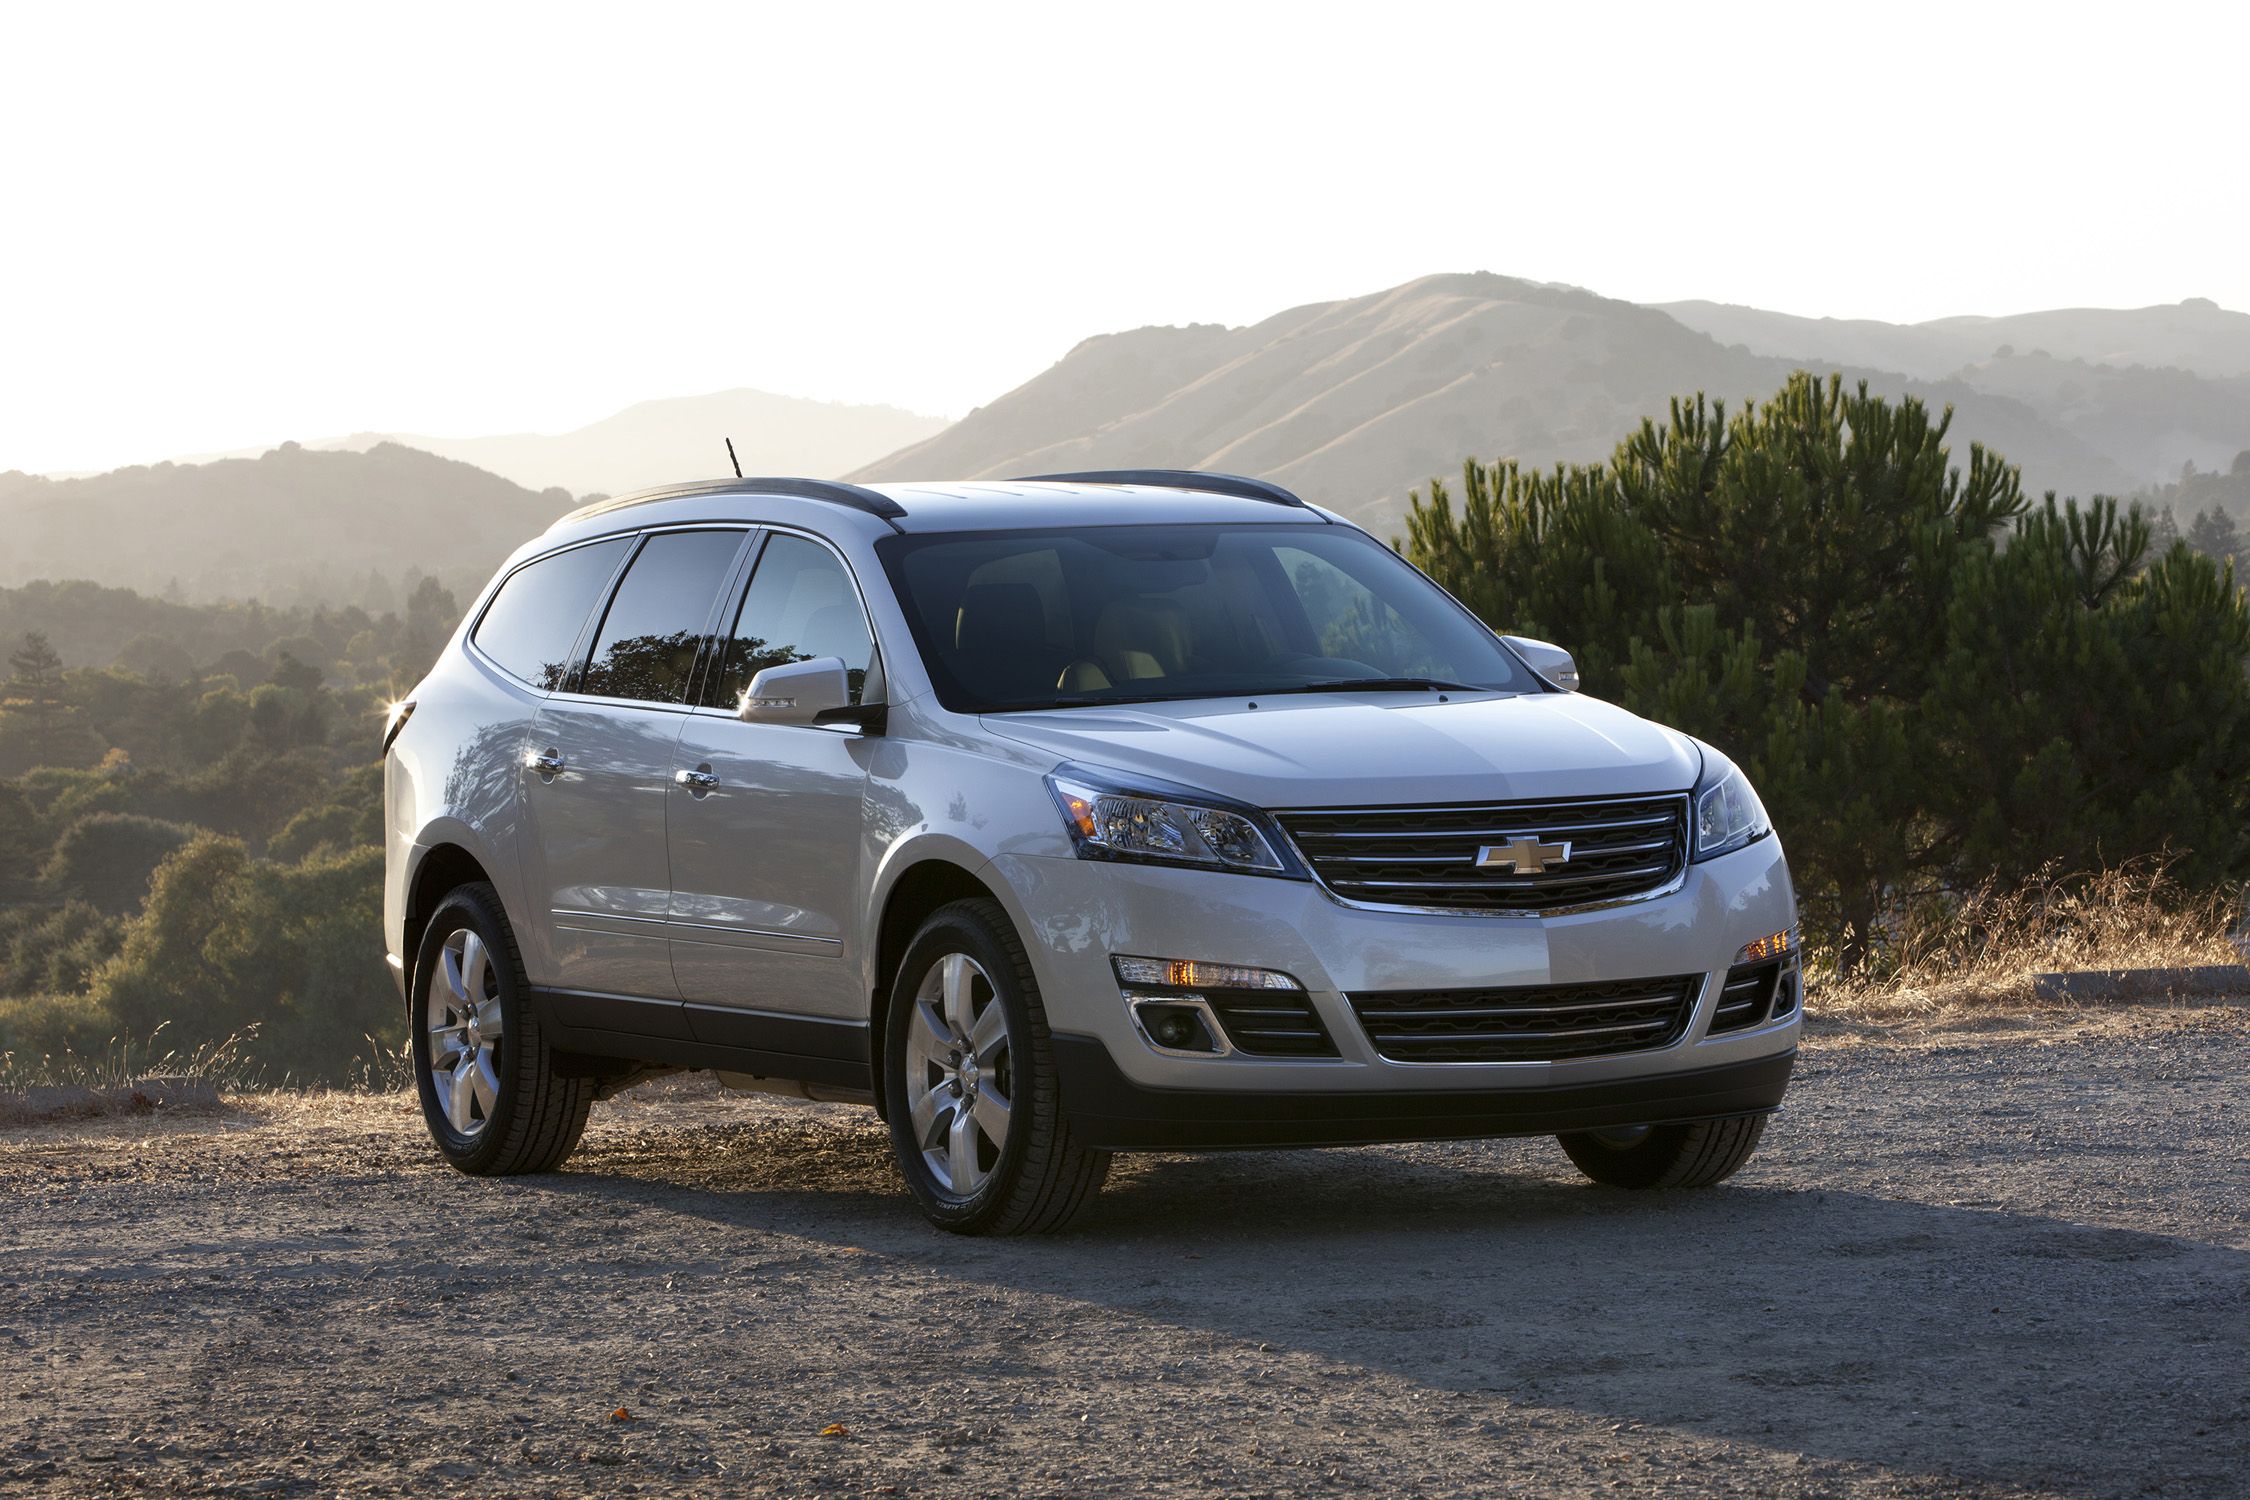 View Photos of the 2017 Chevrolet Traverse